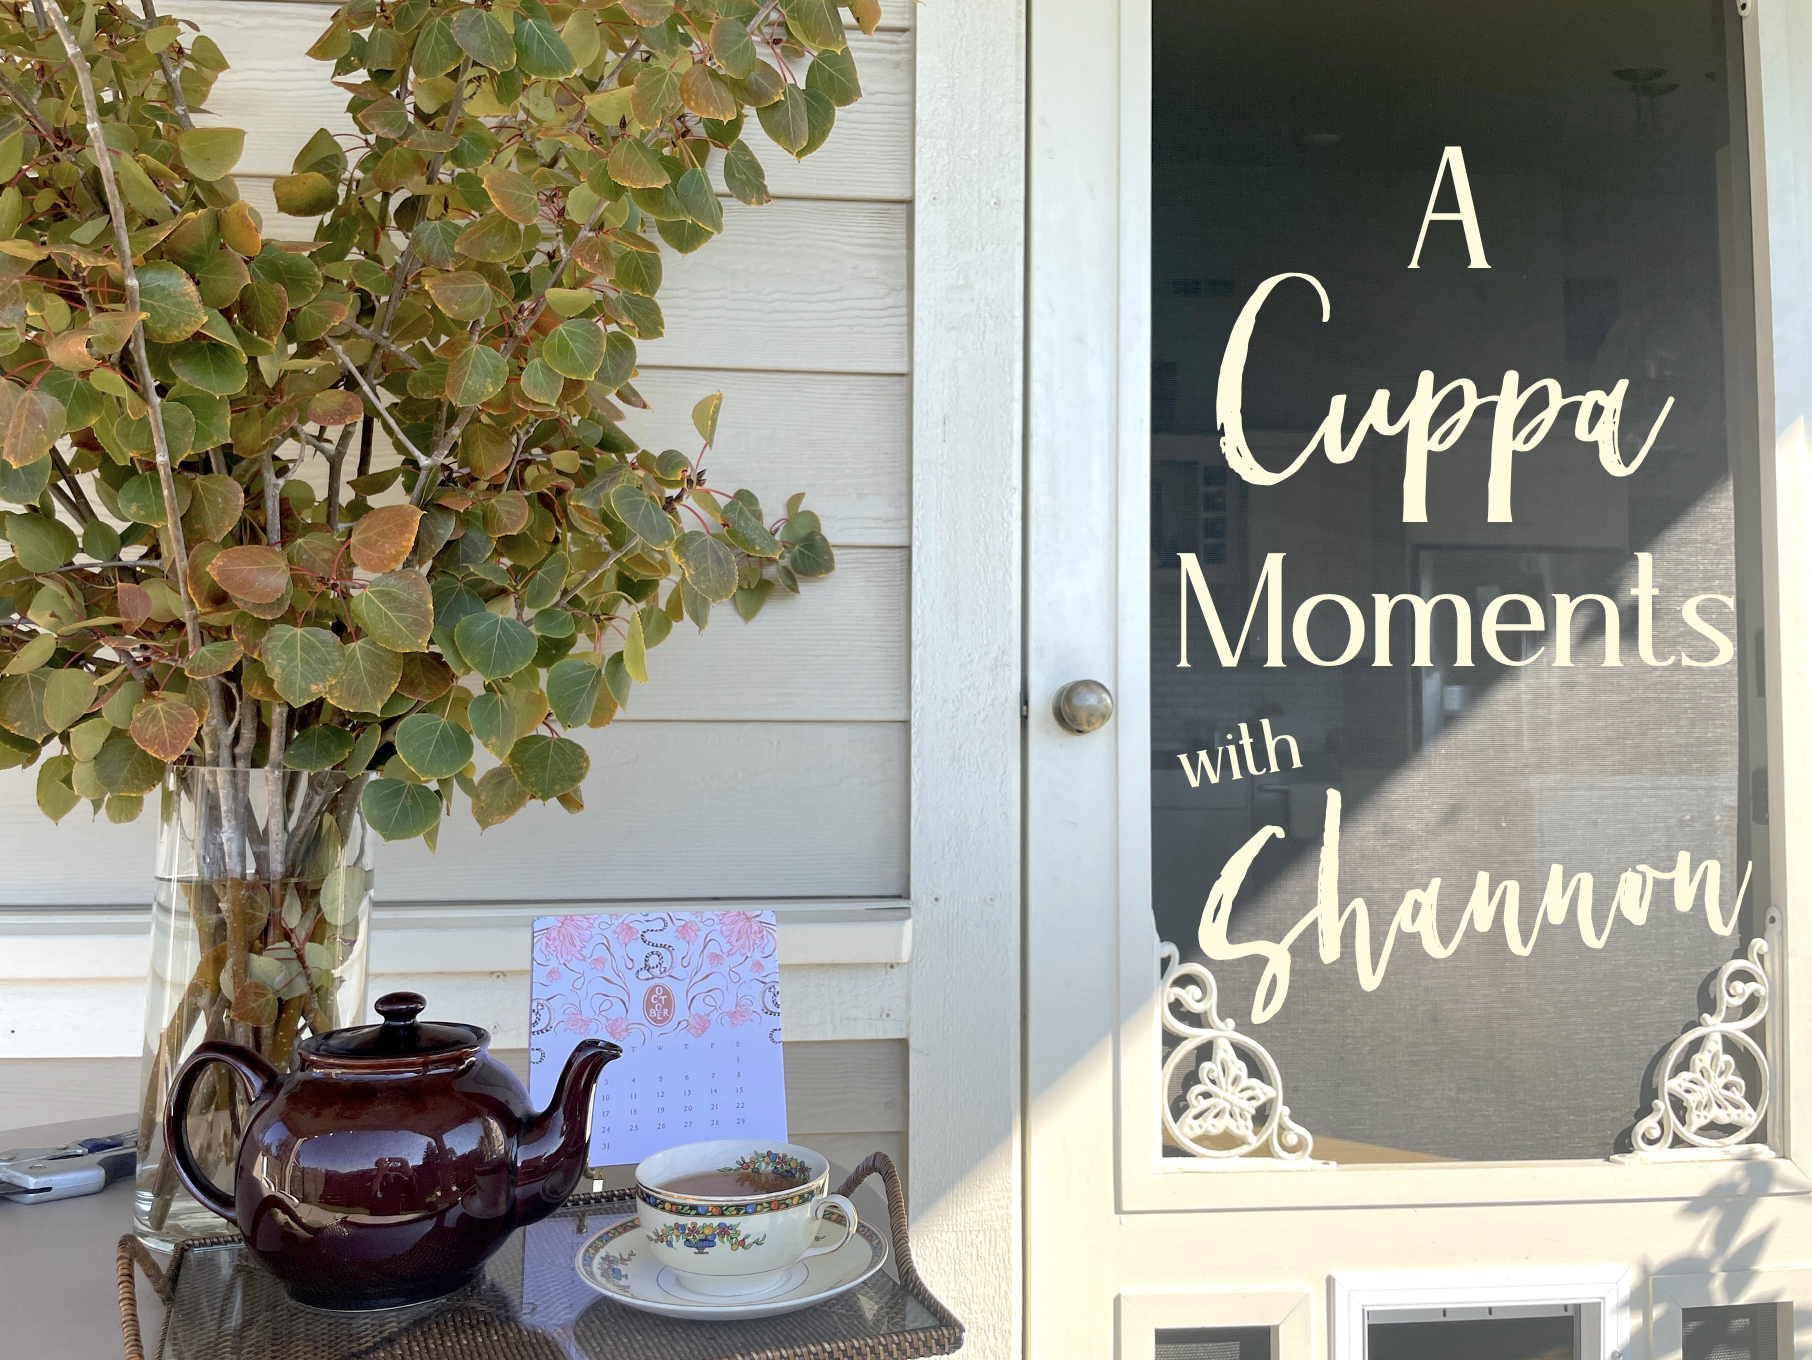 A Cuppa Moments w/Shannon, October 2022